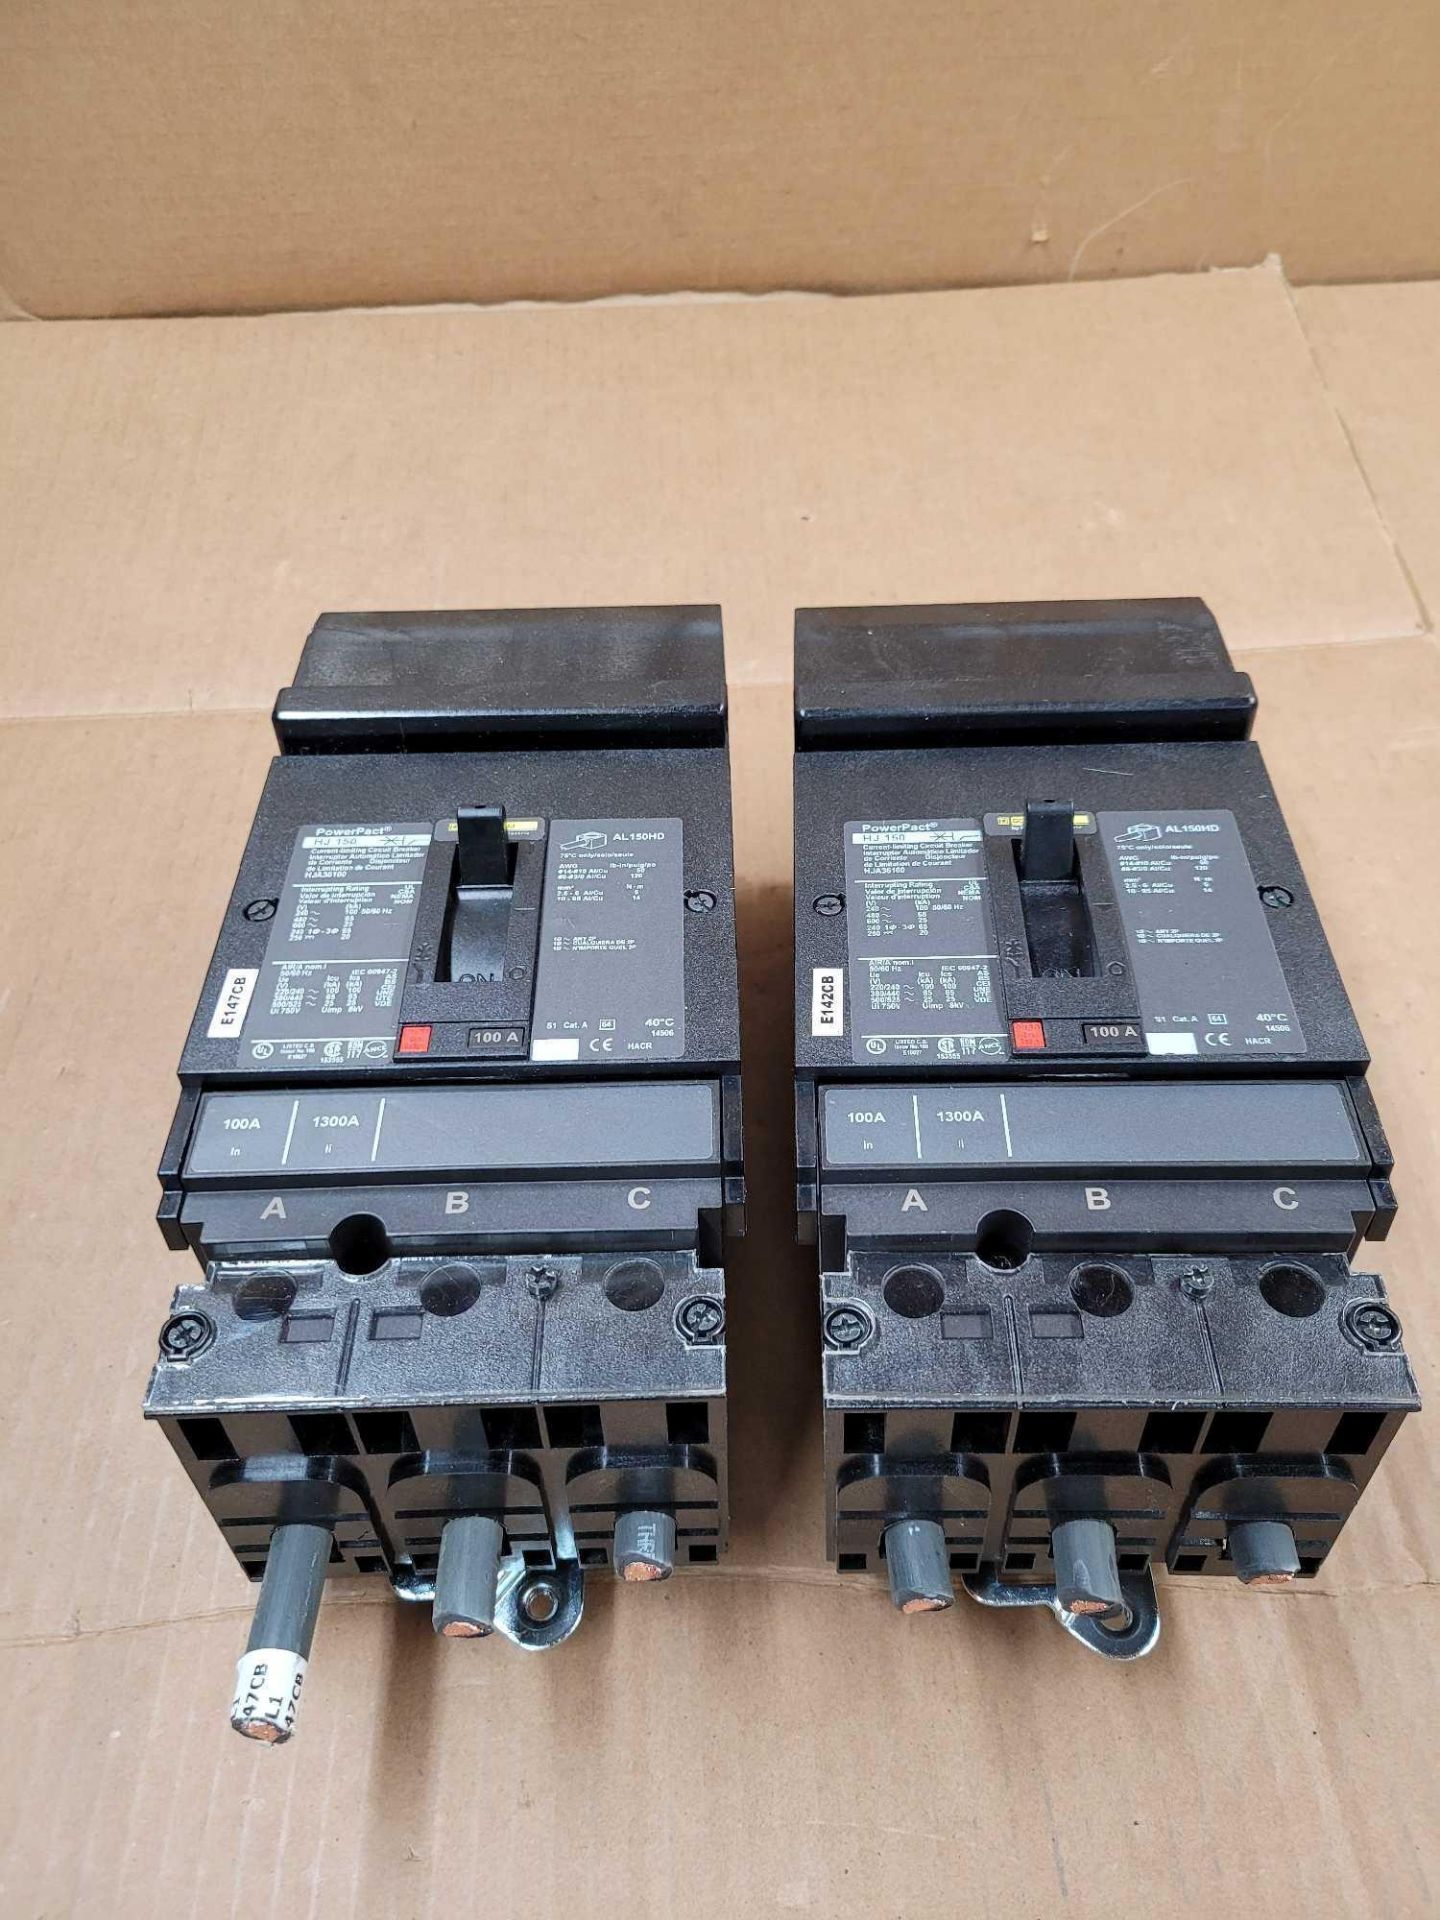 LOT OF 2 SQUARE D HJA36100 / 100 Amp Molded Case Circuit Breaker  /  Lot Weight: 9.6 lbs